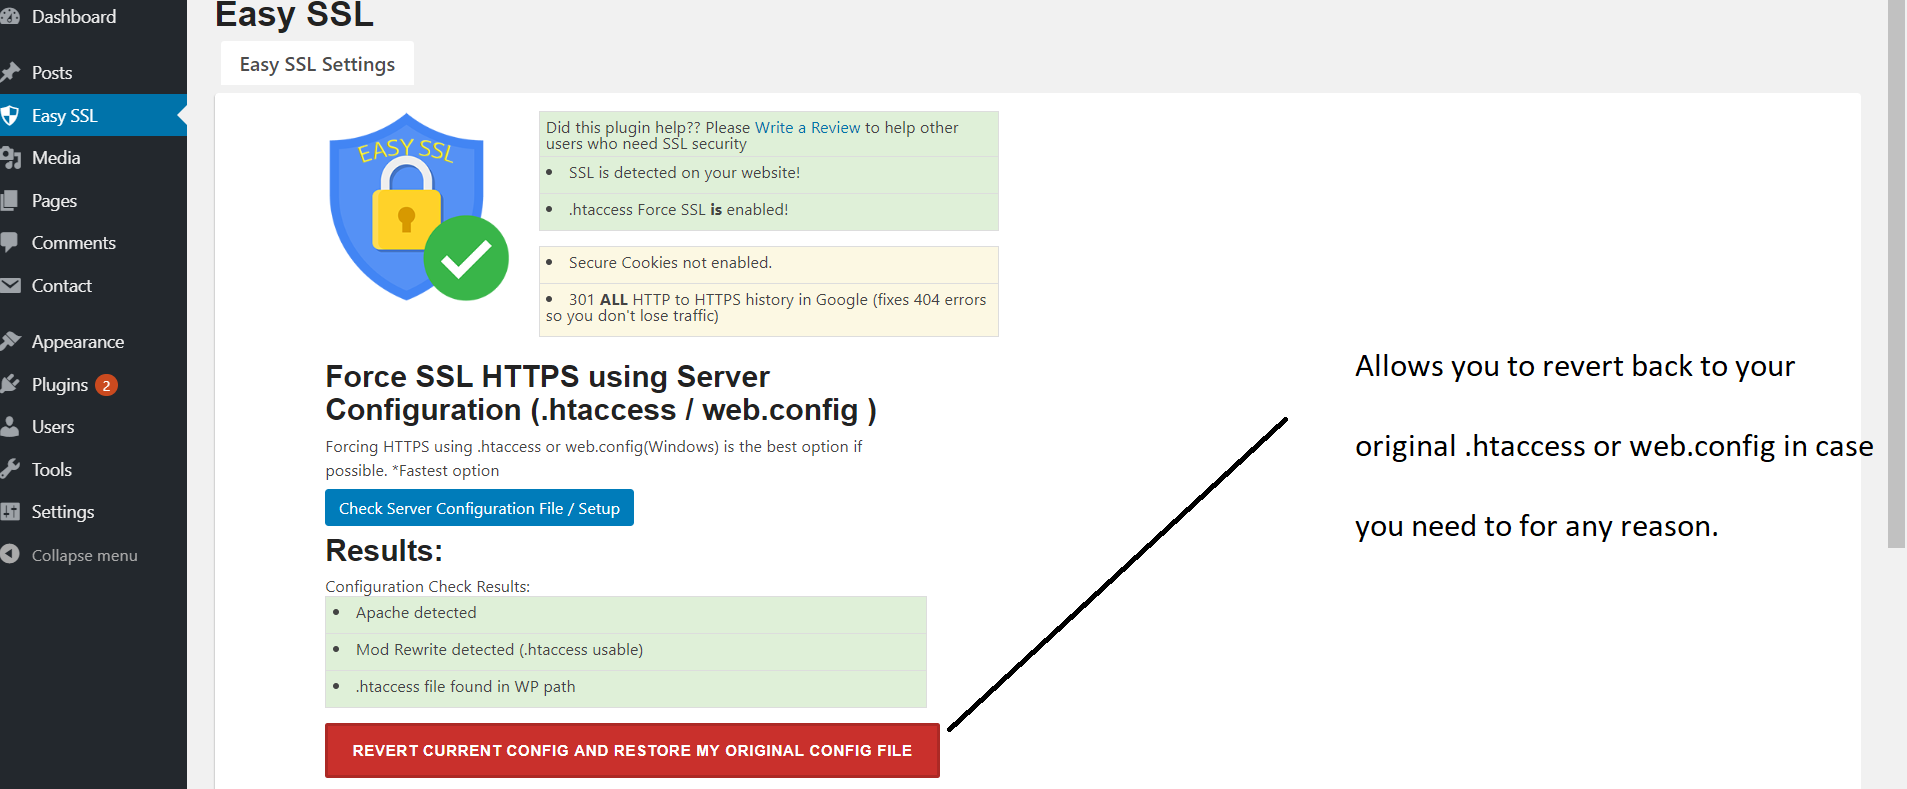 Revert/Restore any server configuration changes to your original server configuration settings